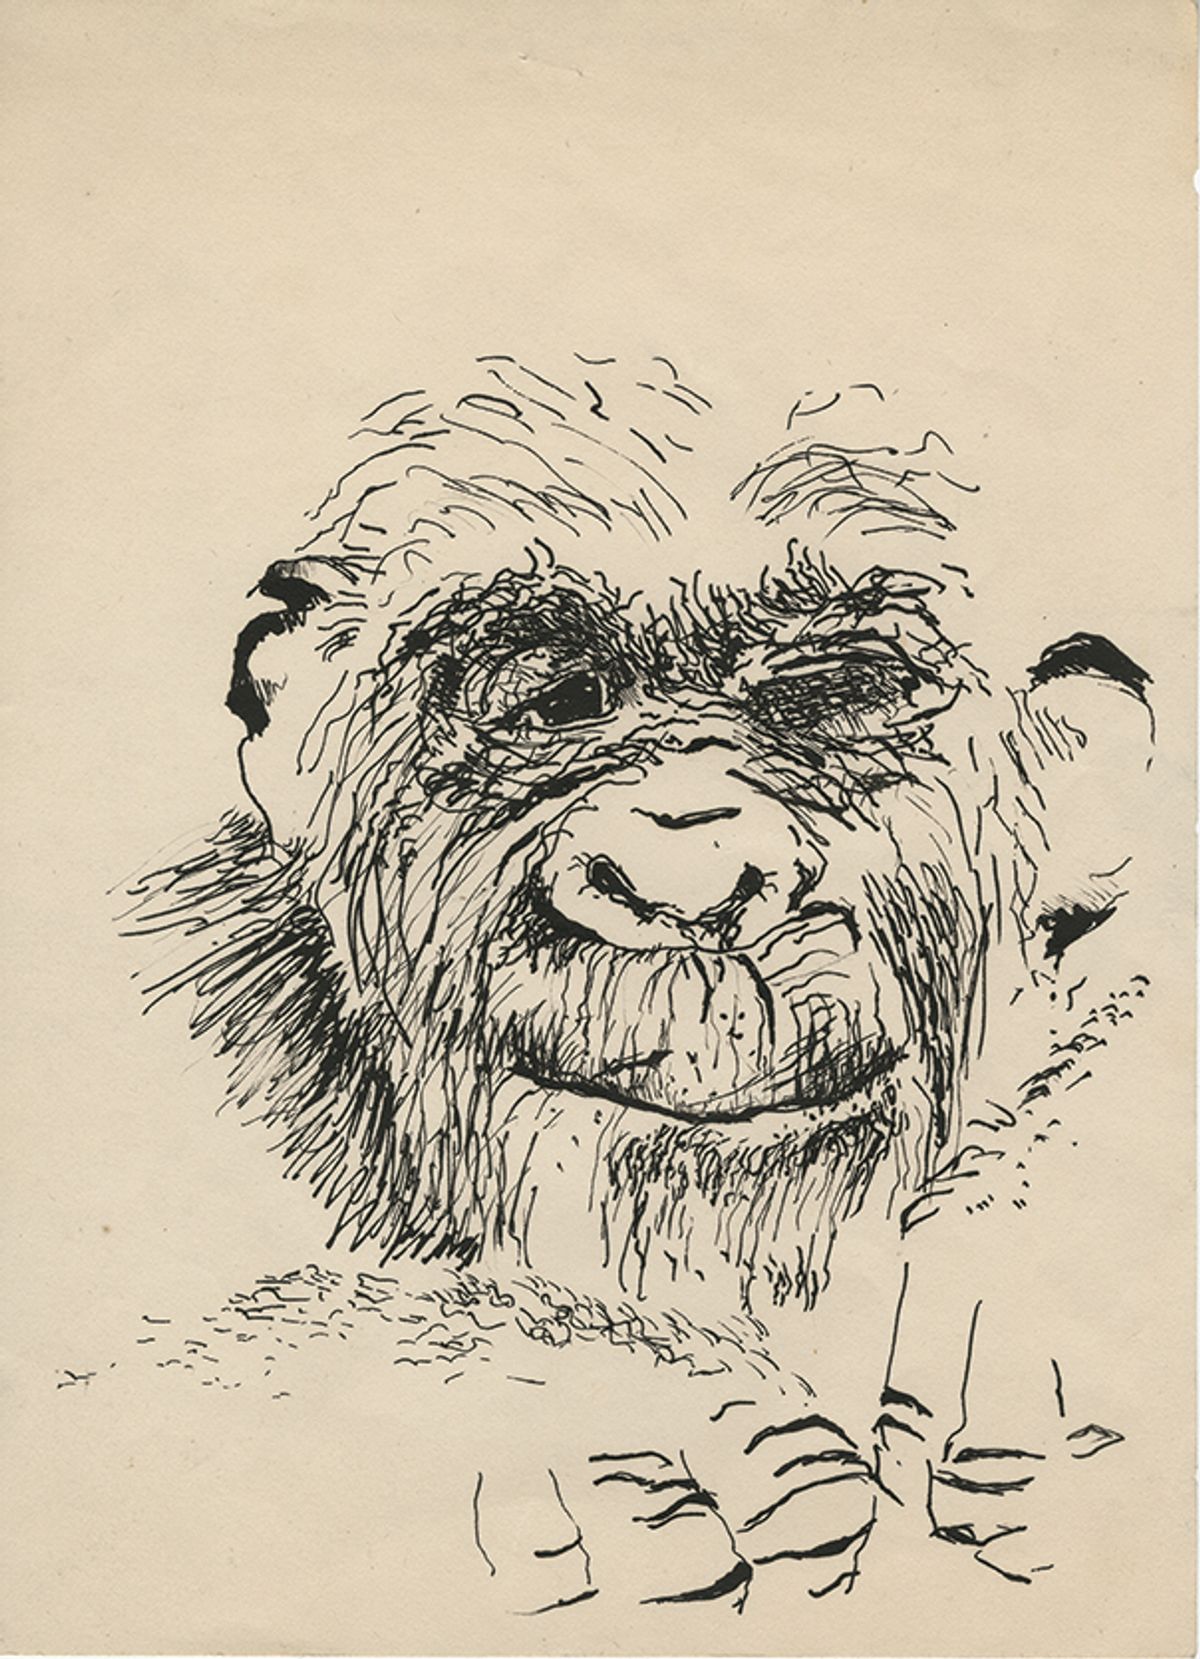 Paul McCarthy, Self-Portrait (1963) Ink on paper Courtesy of the artist and Hauser & Wirth